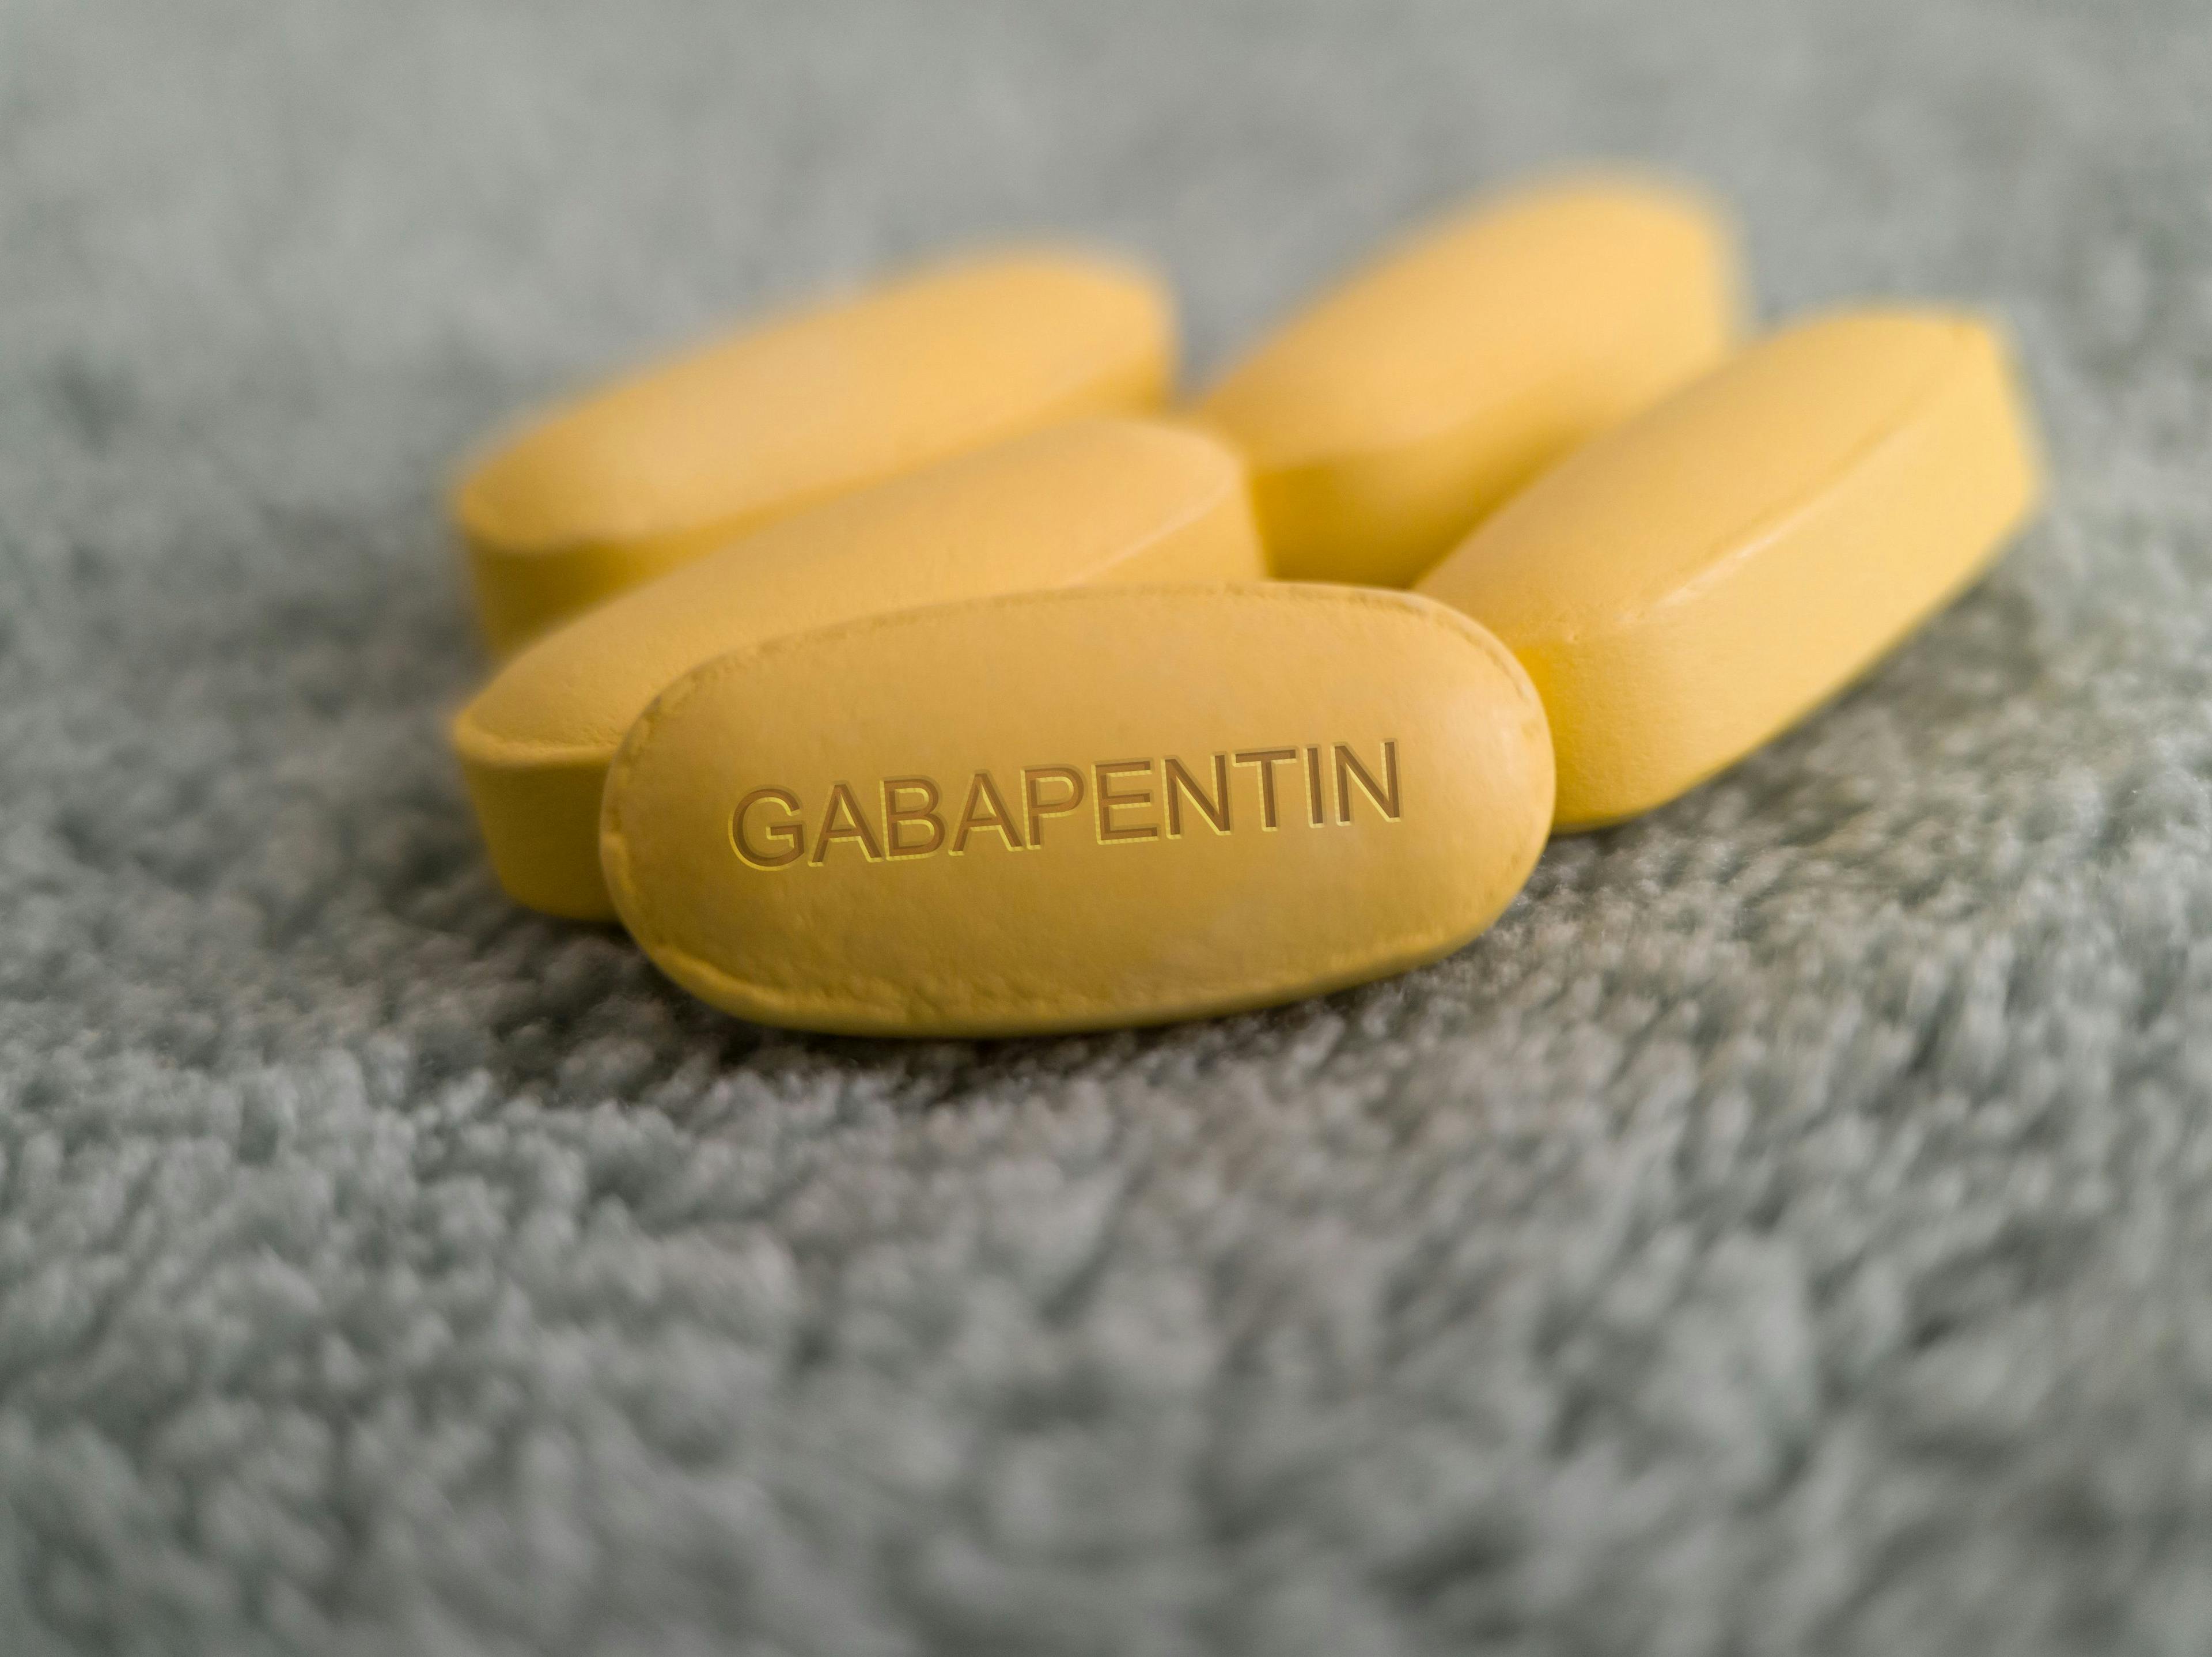 Perioperative Gabapentinoids May Alleviate Pain, Reduce Opioid Use in Patients Undergoing Spine Surgery